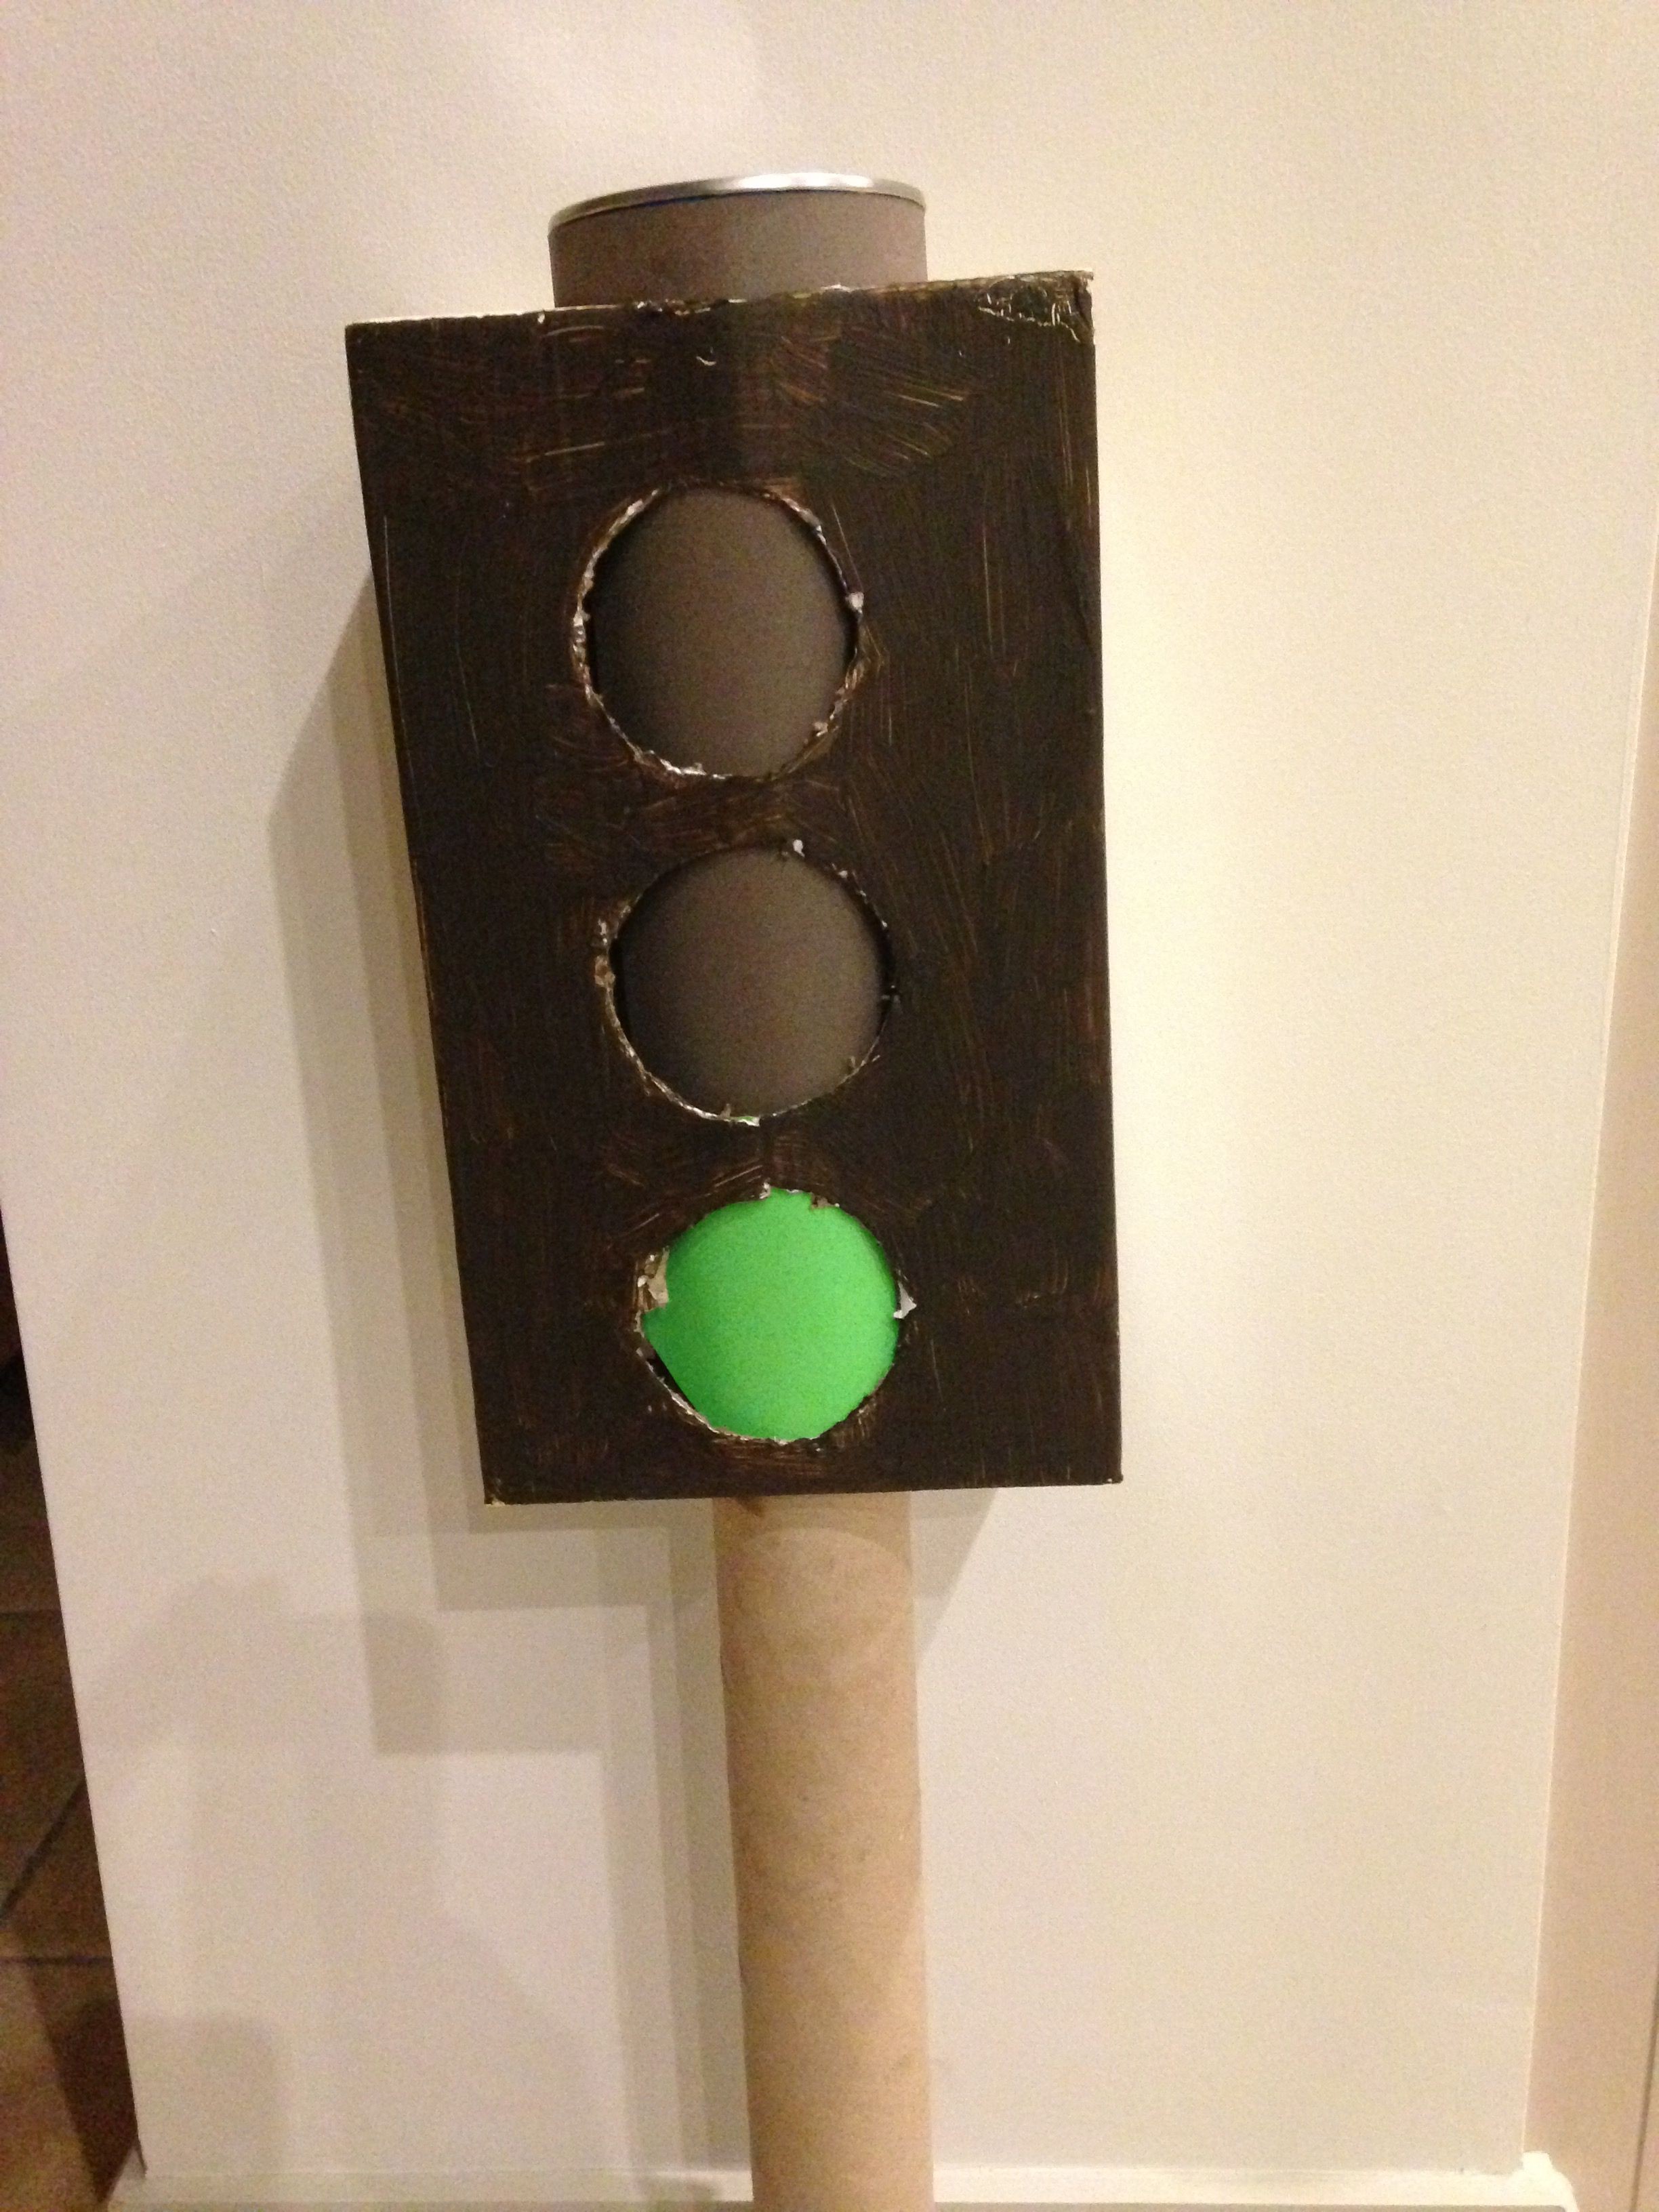 How to make a working traffic light